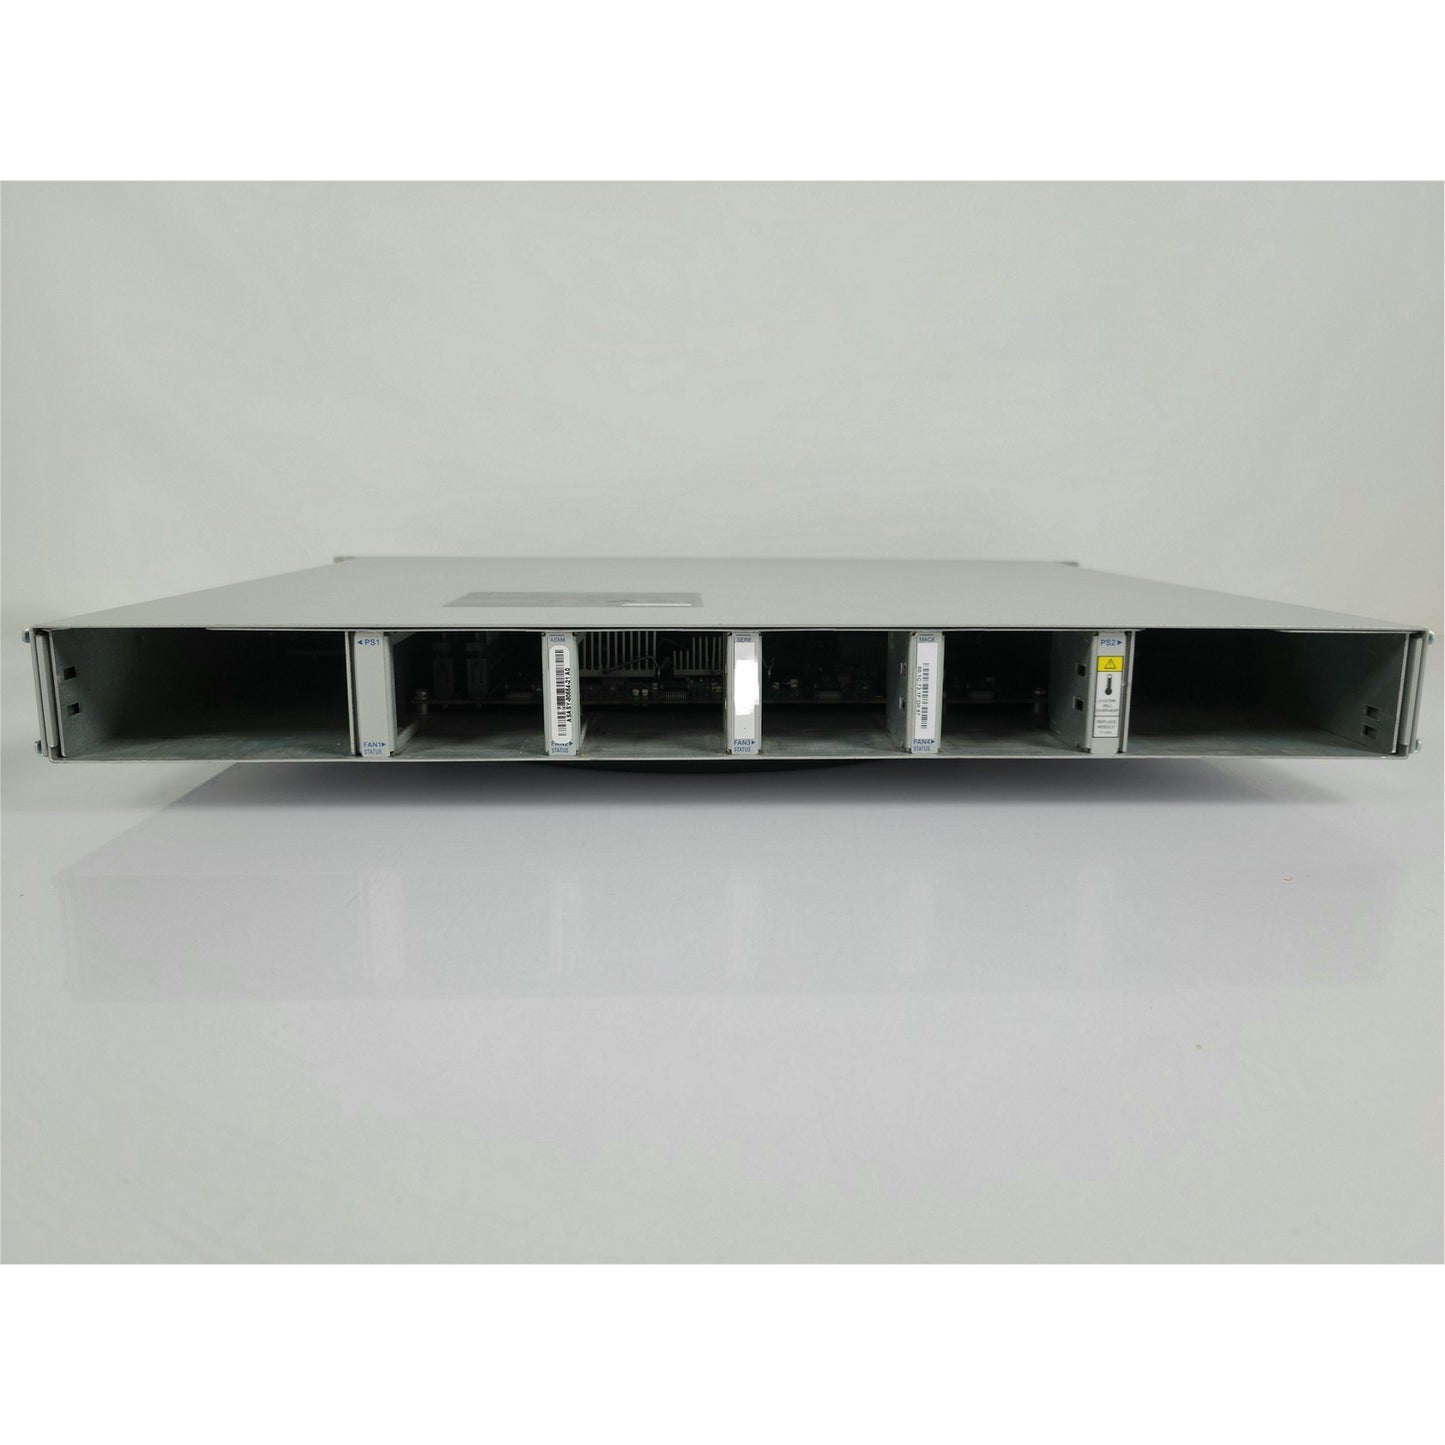 Arista DCS-7050T-36 32xRJ45(1/10GBASE-T) & 4xSFP+ chassis only. (Used - Good)